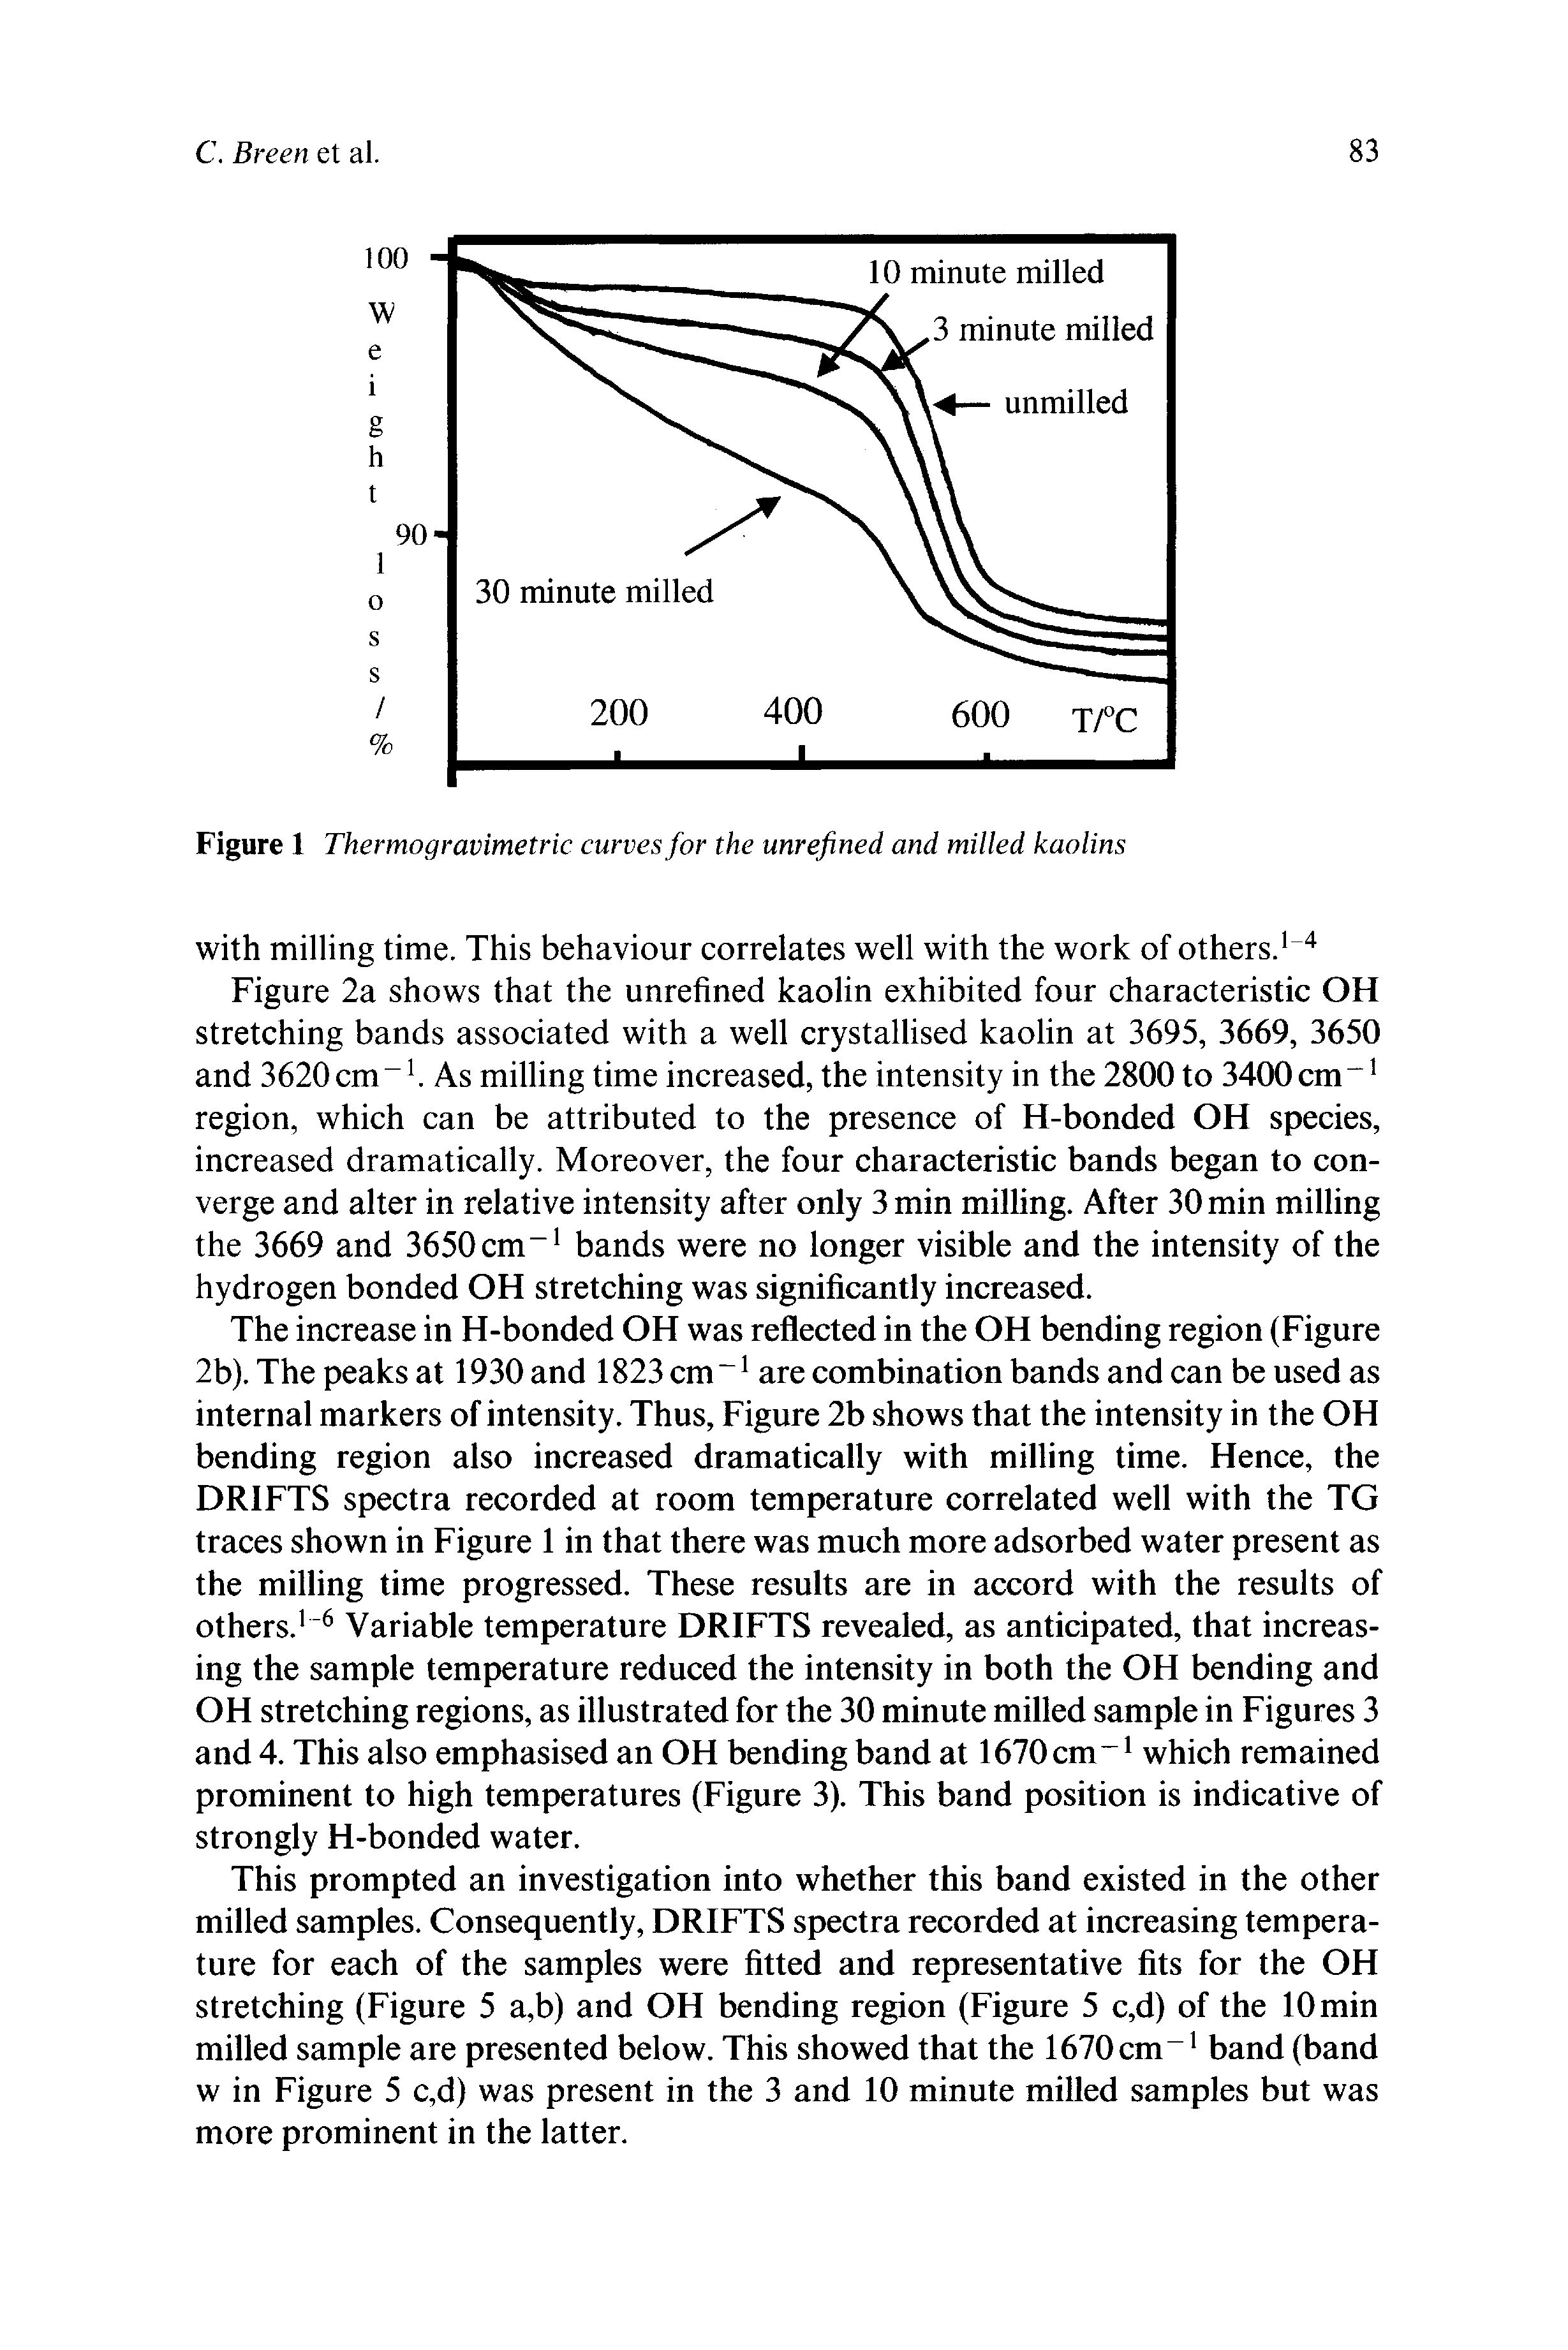 Figure 1 Thermogravimetric curves for the unrefined and milled kaolins...